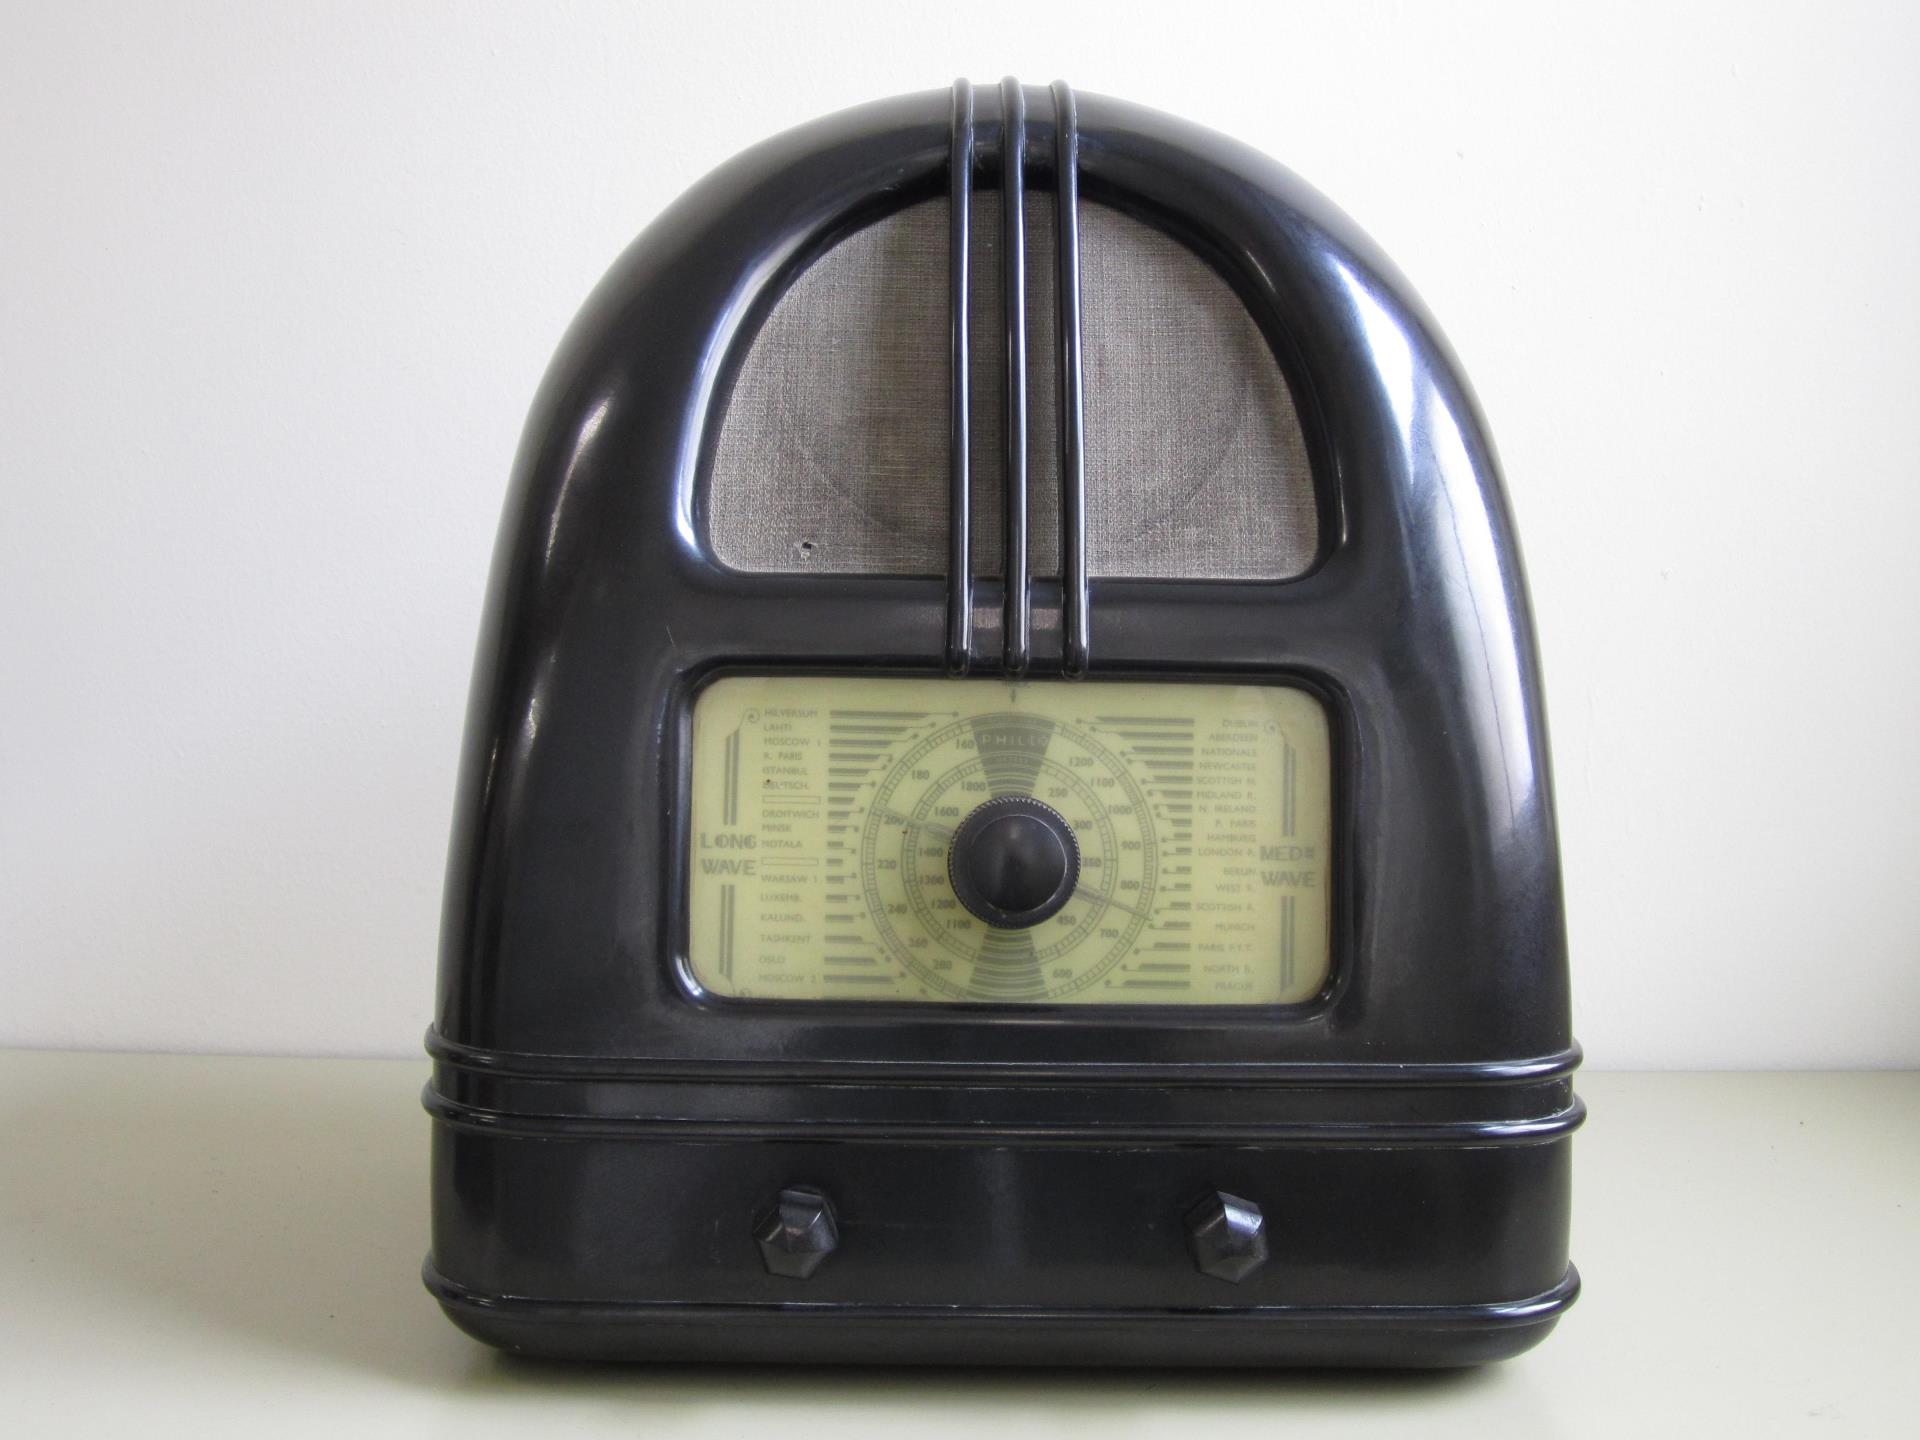 Philco Peoples Set made in 1936